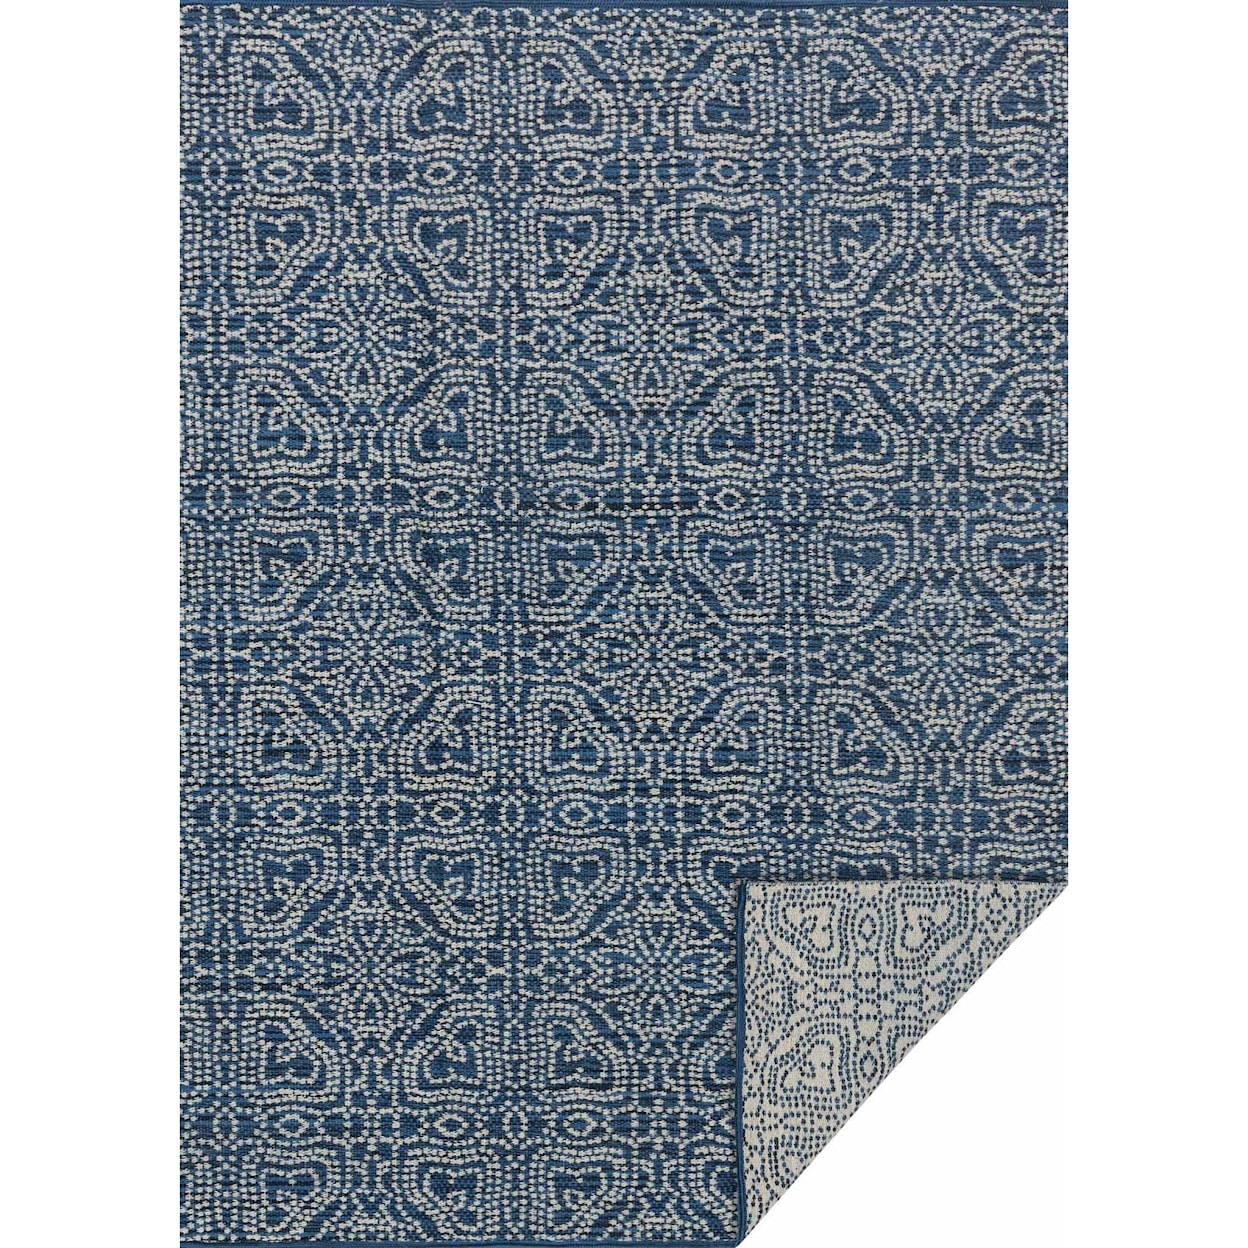 Magnolia Home by Joanna Gaines for Loloi Emmie Kay 3' 6" x 5' 6" Rectangle Rug